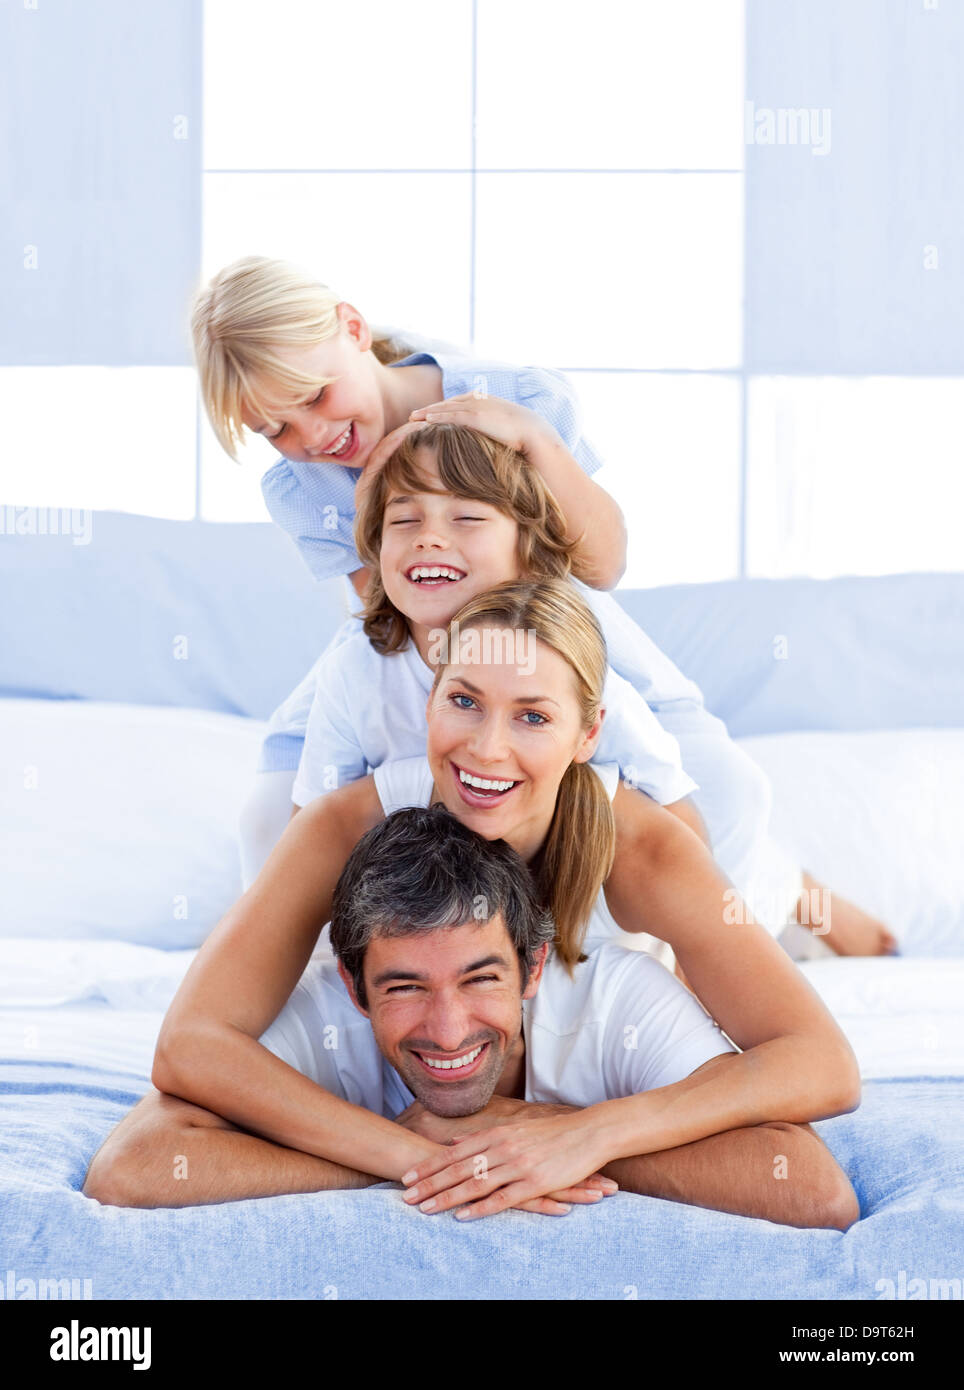 Family piled on top of dad Stock Photo